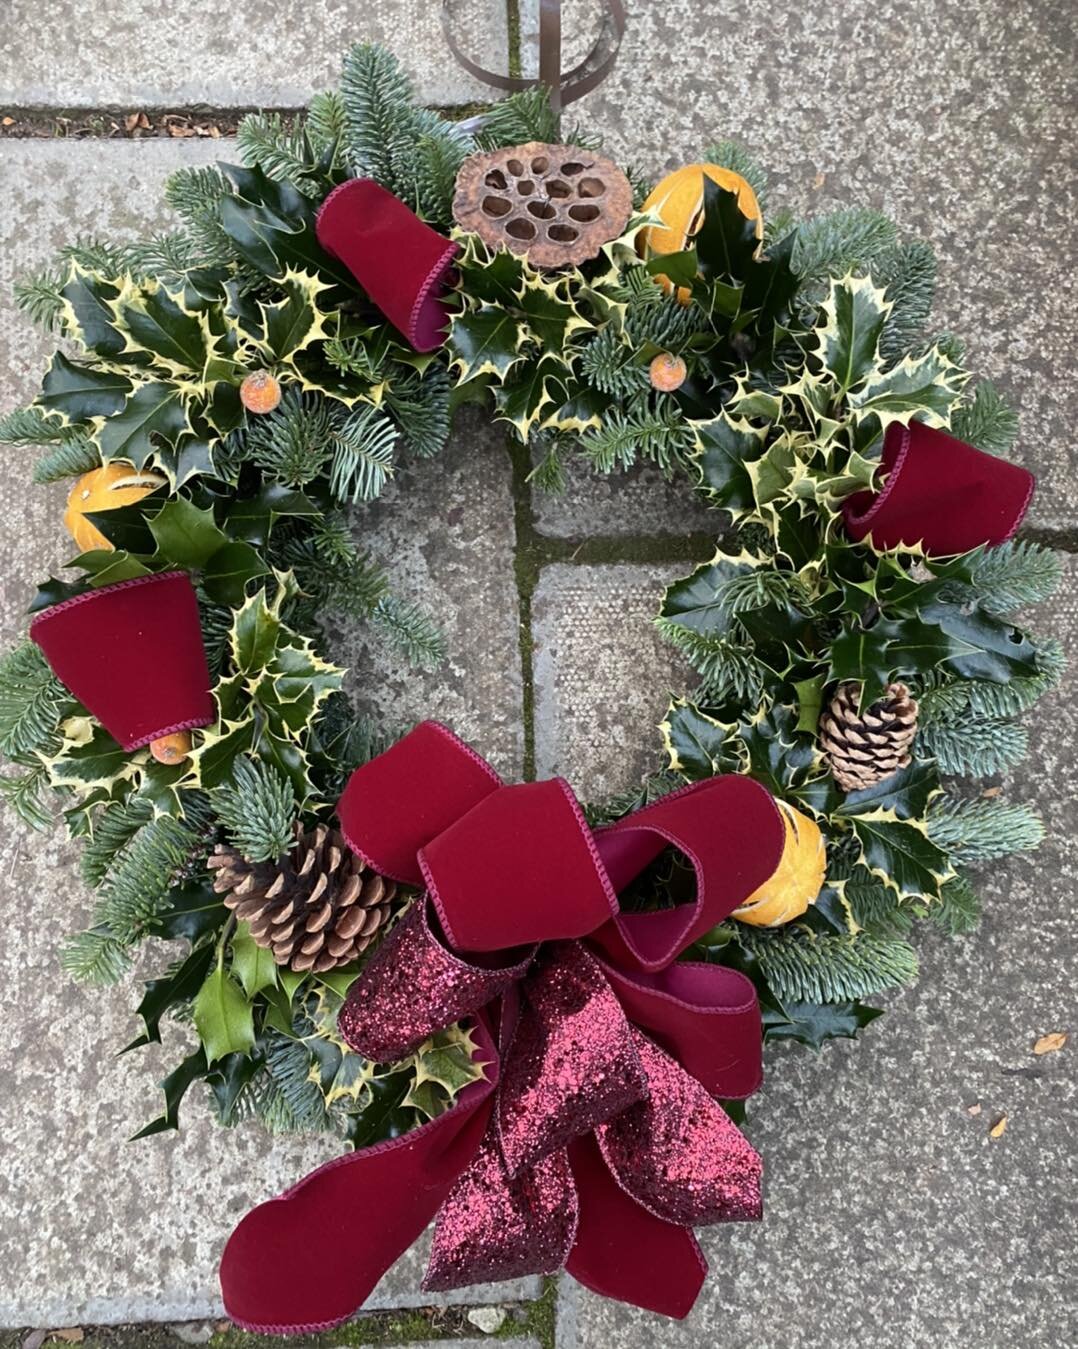 First wreath orders going out over the next few days. You can also pop in and pick one up. Here are a few examples of door wreaths we have available at the moment. All hand made on site! 
#millgardencentre #Christmas #wreaths #handmade #christmaswrea